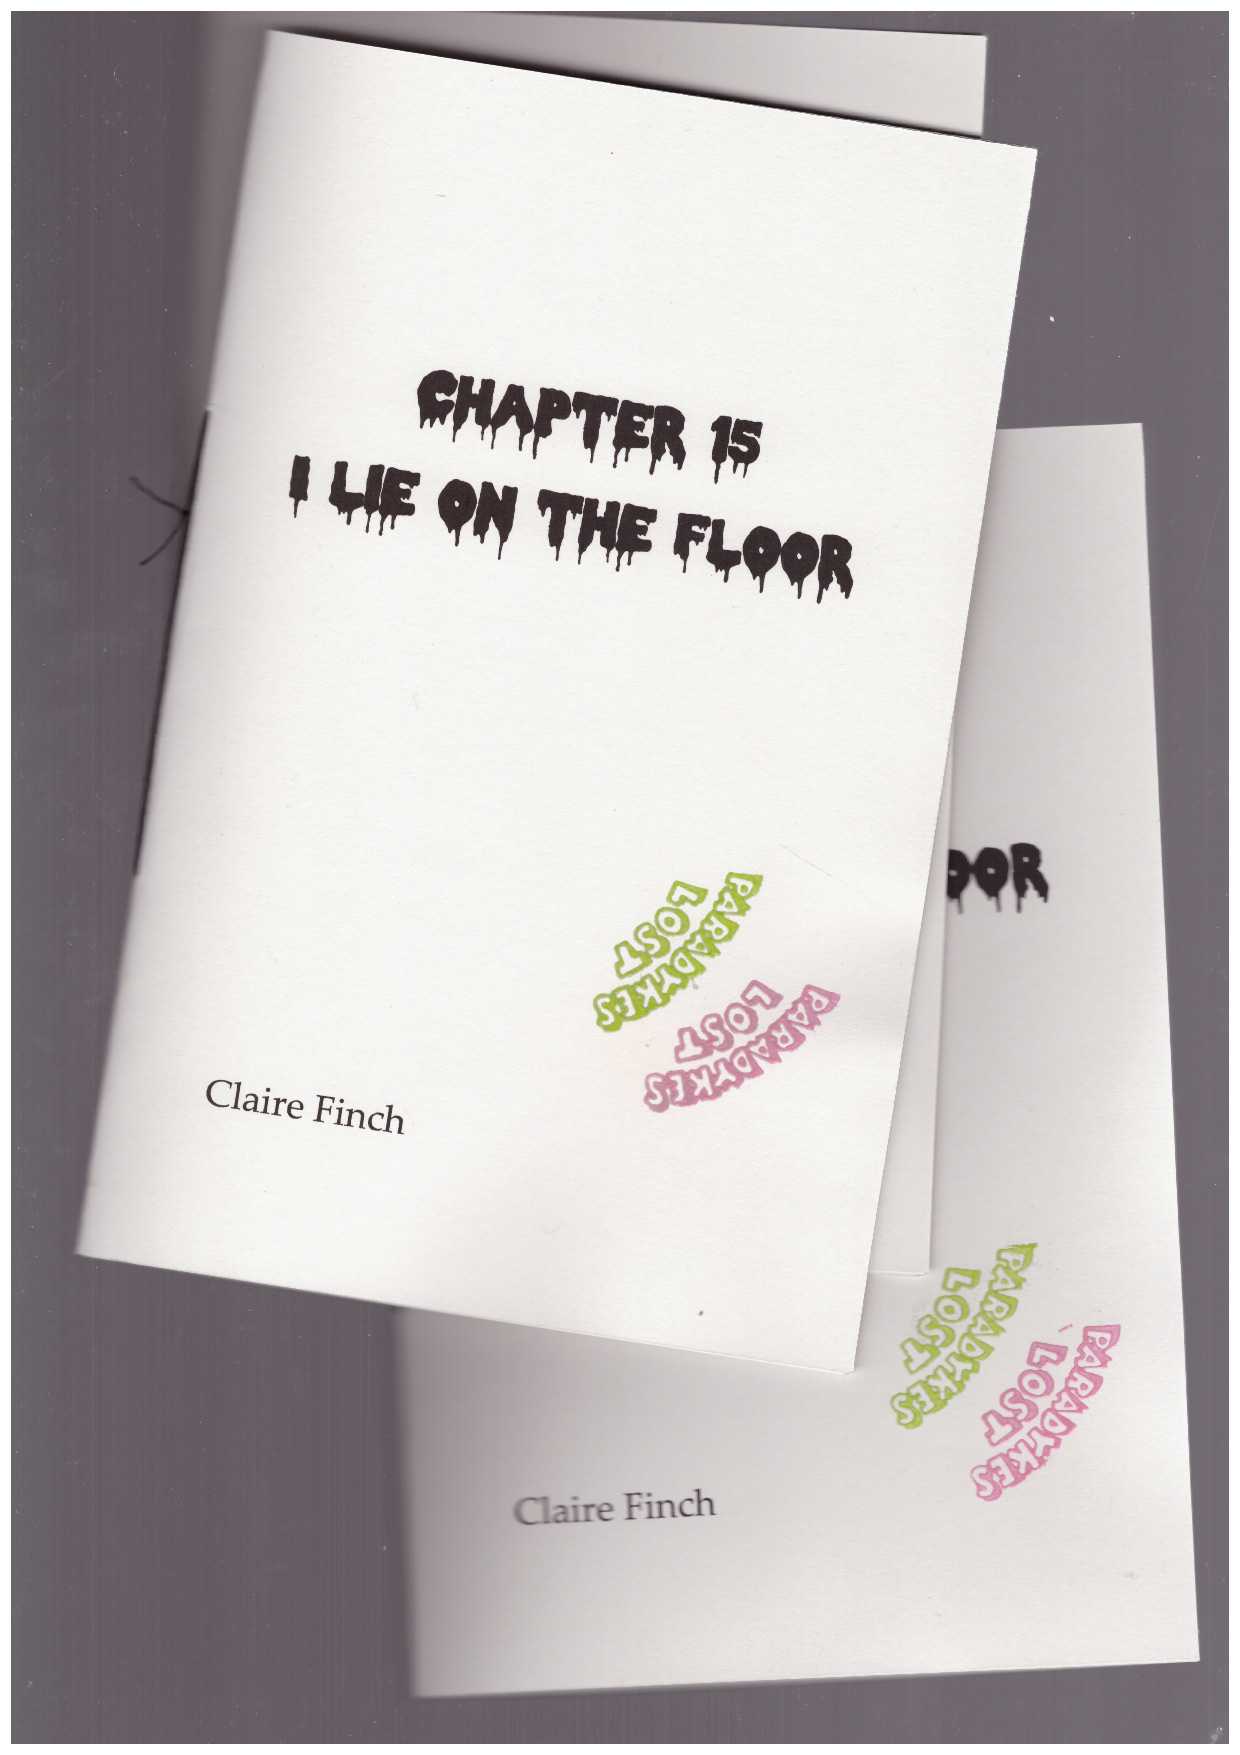 FINCH, Claire - Chapter 15: I lie on the floor – Presage Pamphlet Series